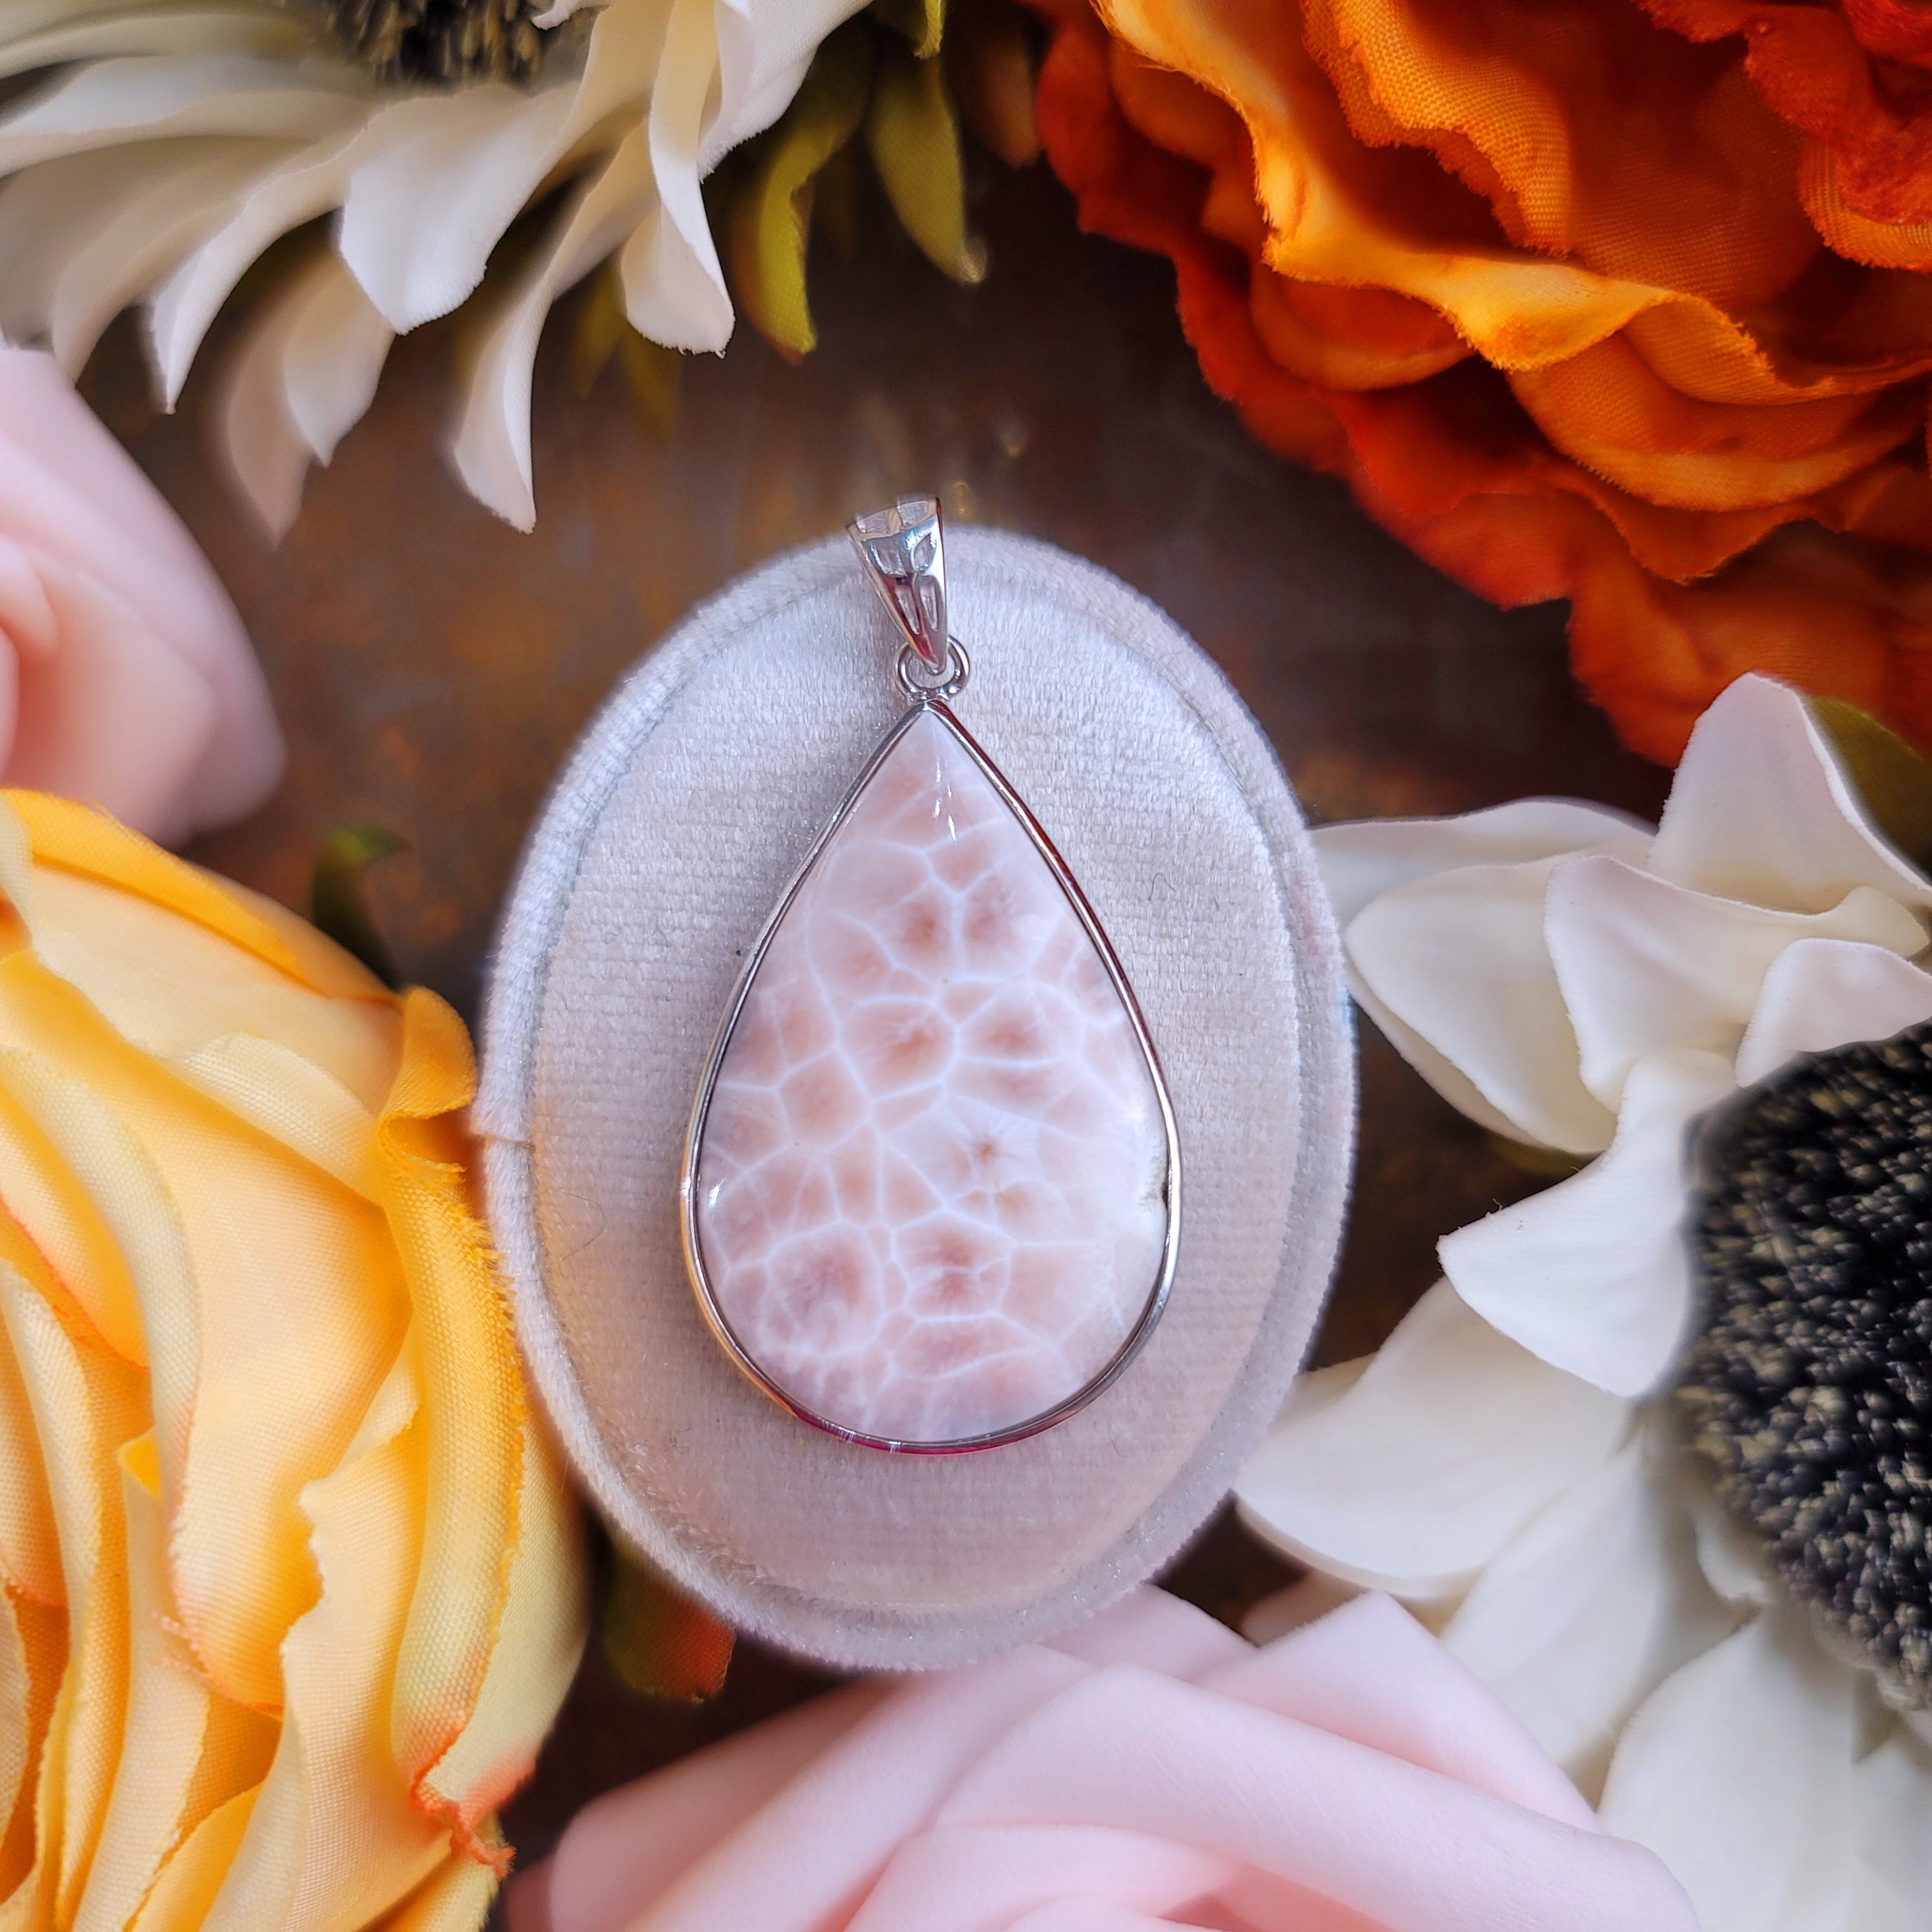 Natrolite Pendant .925 Silver for Channeling, Psychic Abilities and Awakening of your Third Eye Chakra.